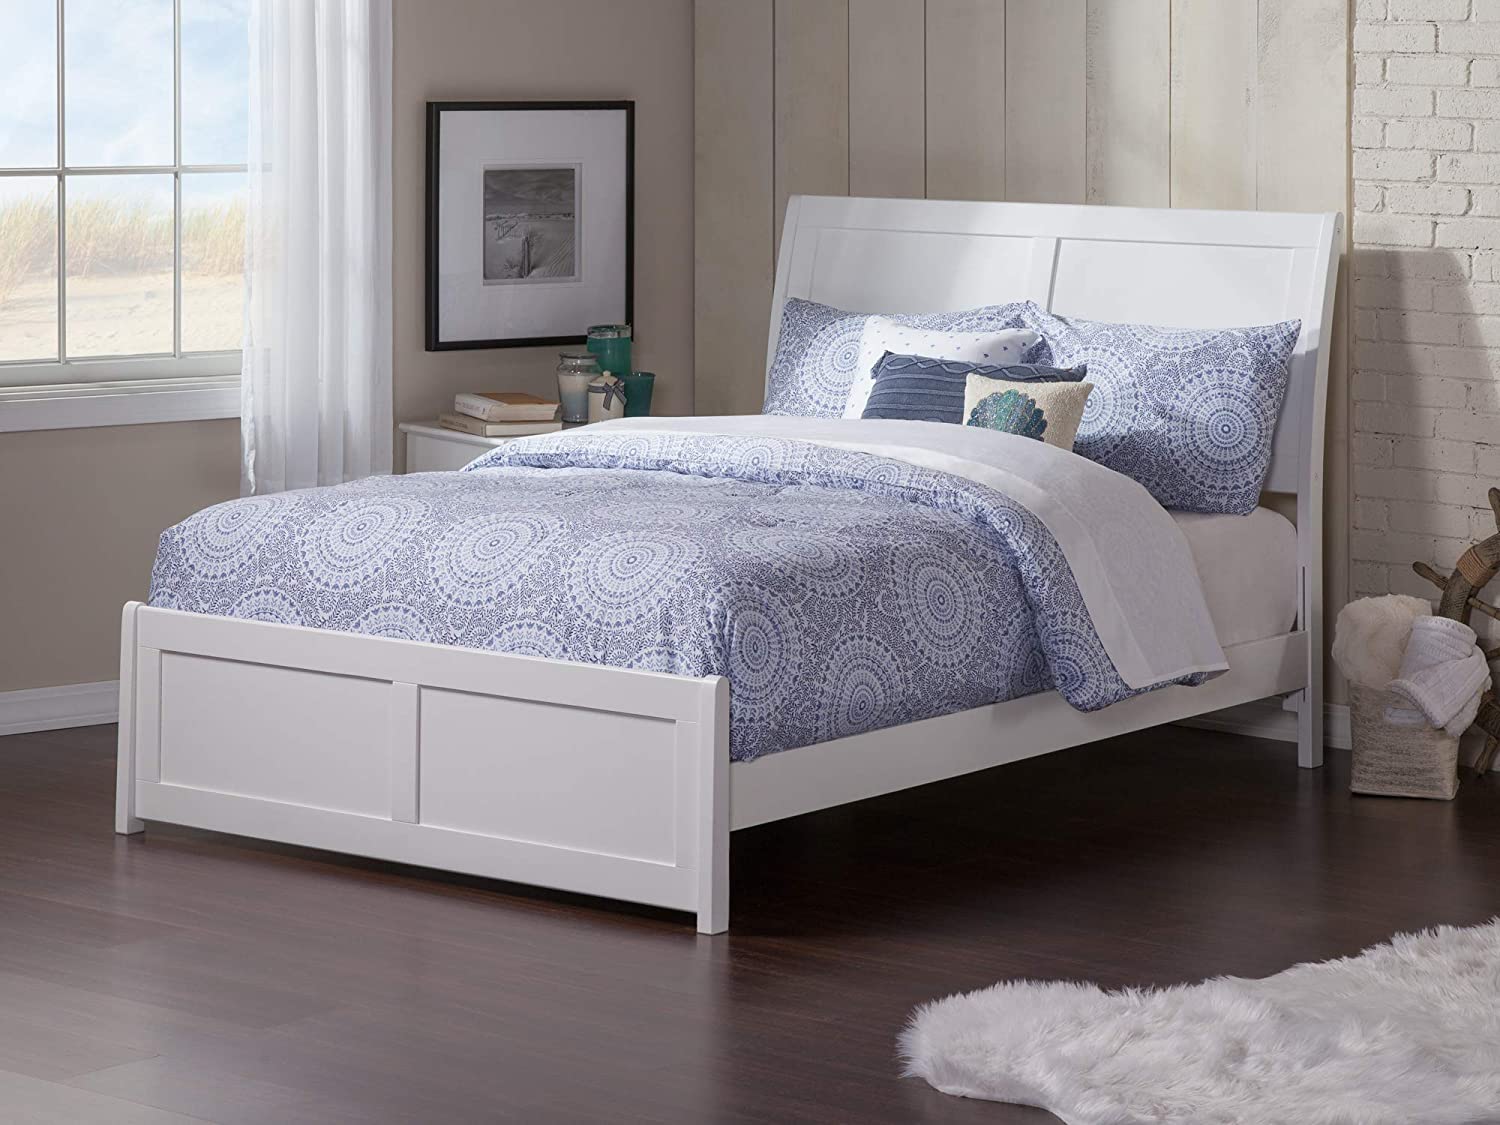 AFI Portland Traditional Bed with Matching Footboard and Turbo Charger, Full, White